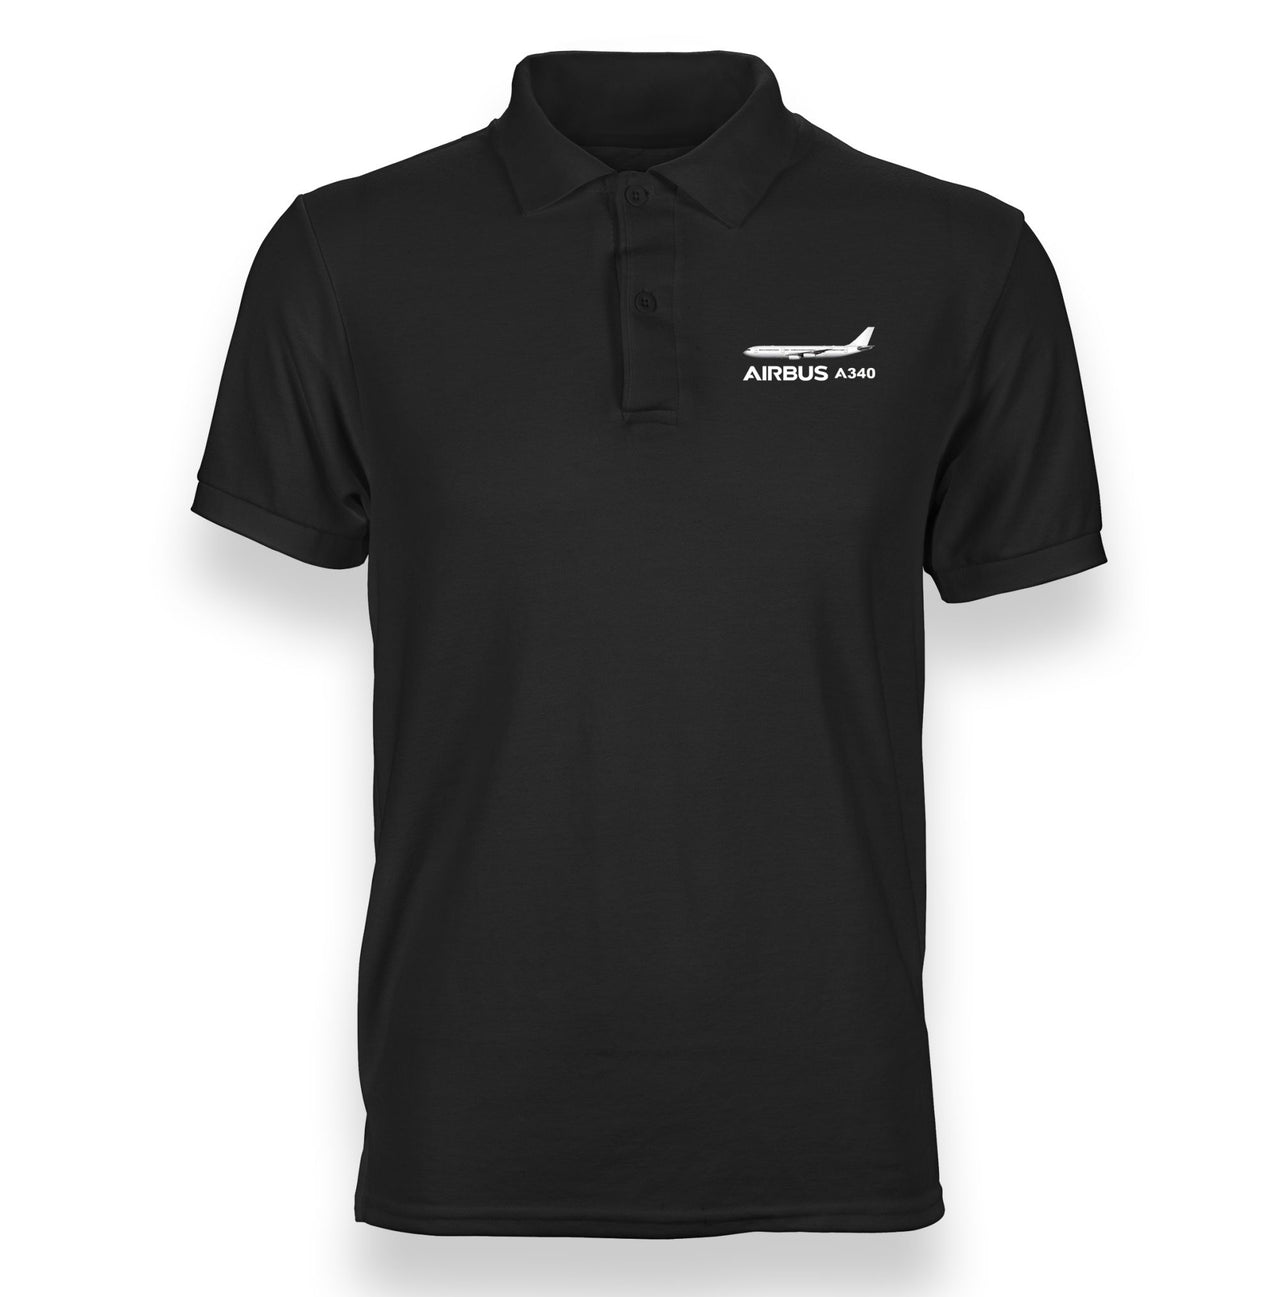 The Airbus A340 Designed "WOMEN" Polo T-Shirts